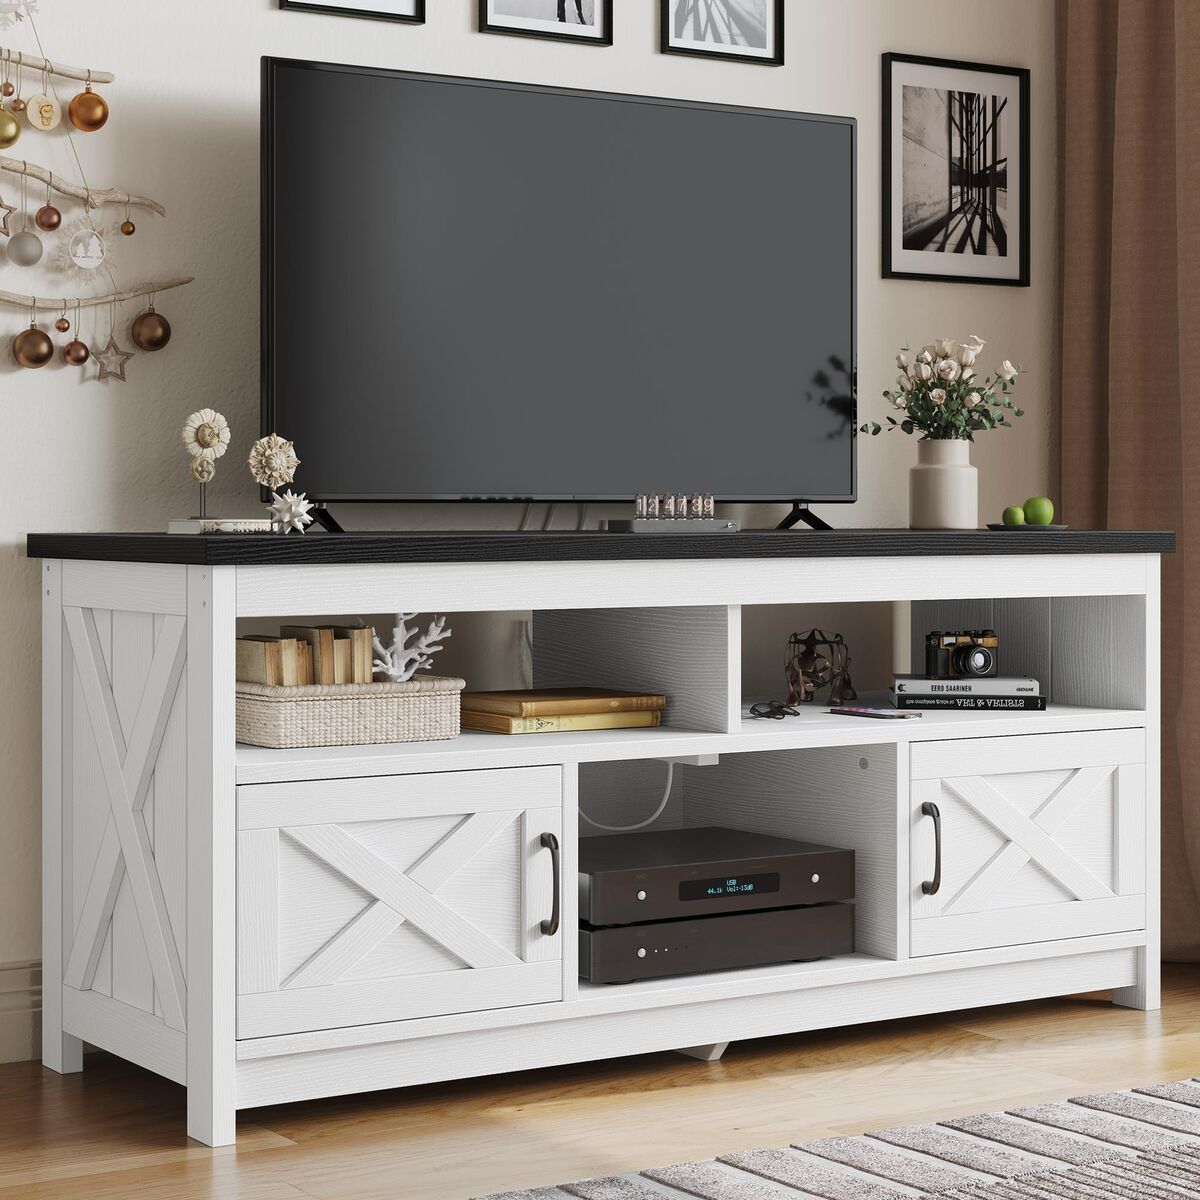 Tv Stand For 65 Inch Entertainment Center With Power Outlets Media Console  Table | Ebay Intended For Media Entertainment Center Tv Stands (View 11 of 15)